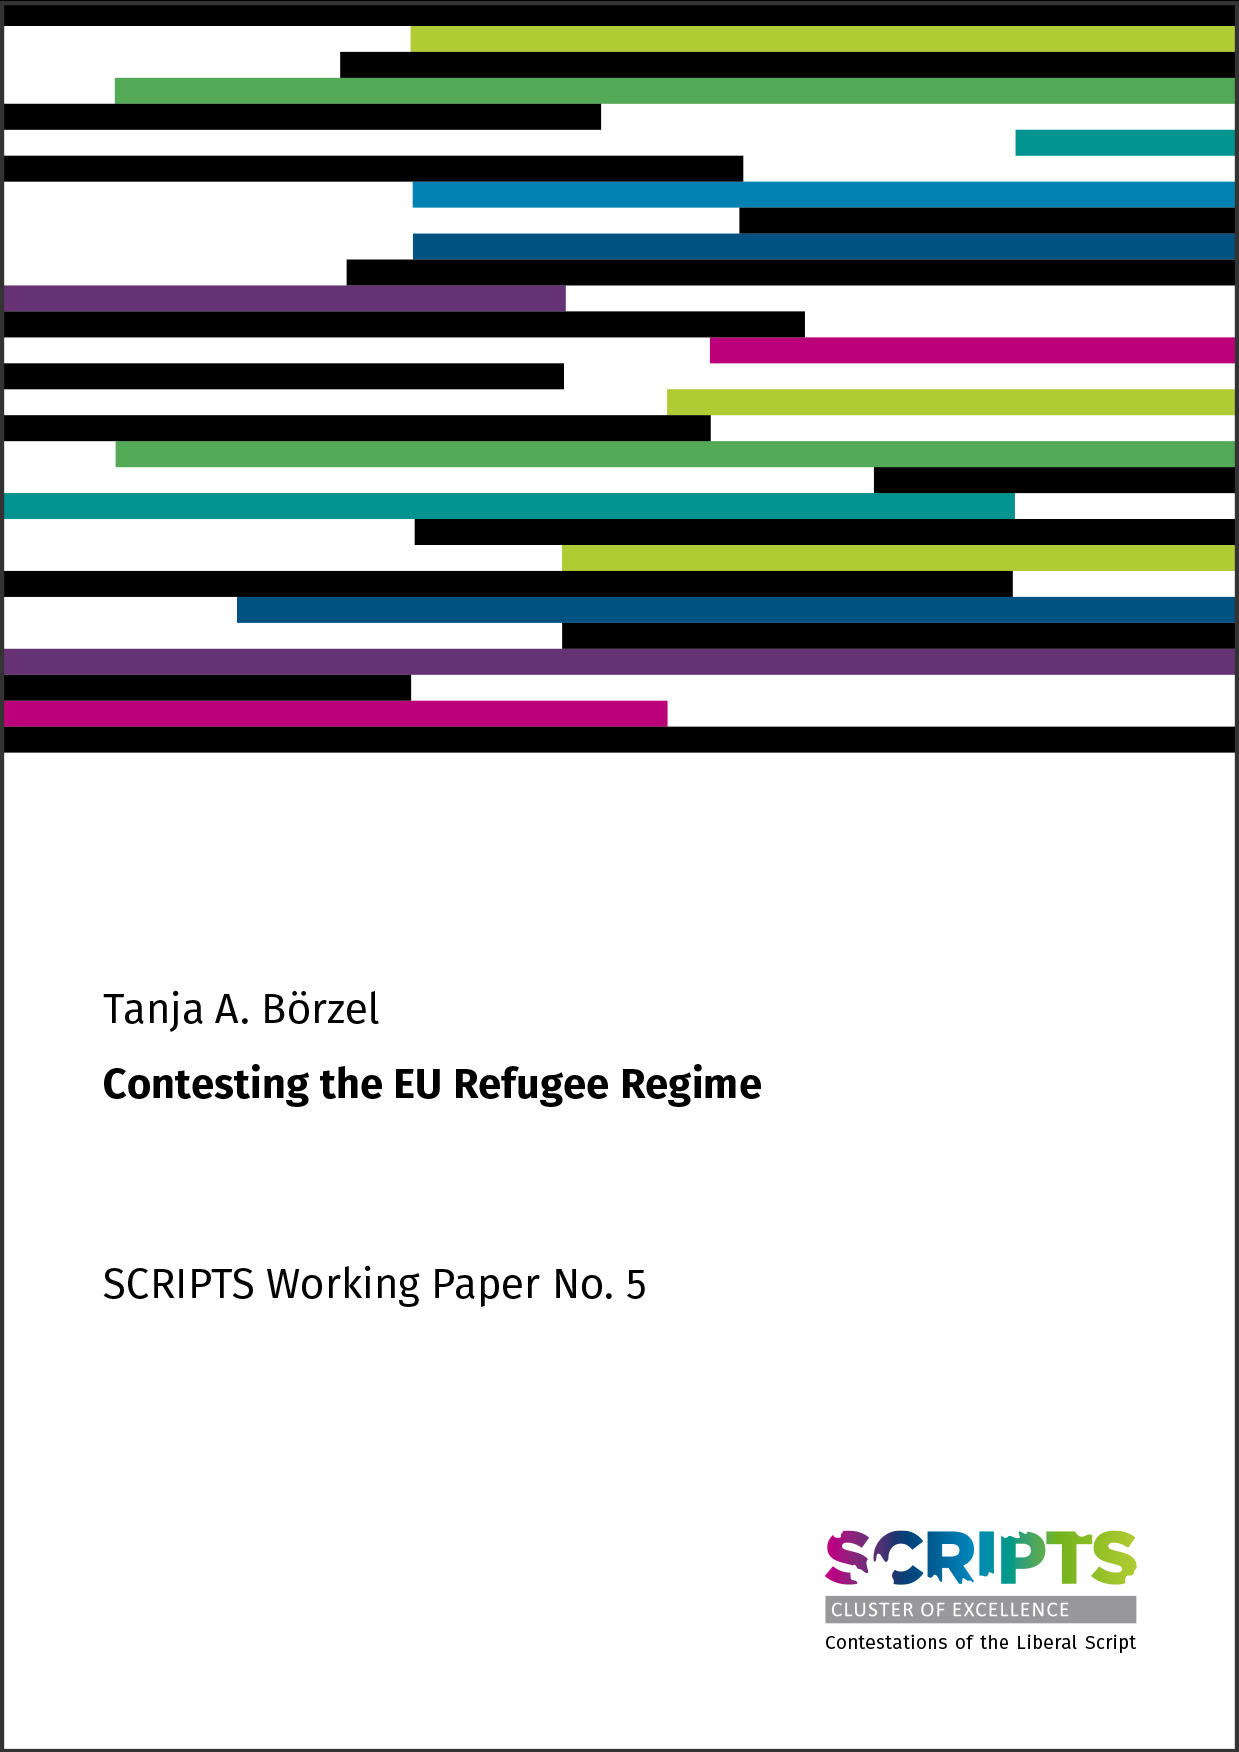 SCRIPTS_Working_Paper_5_Cover